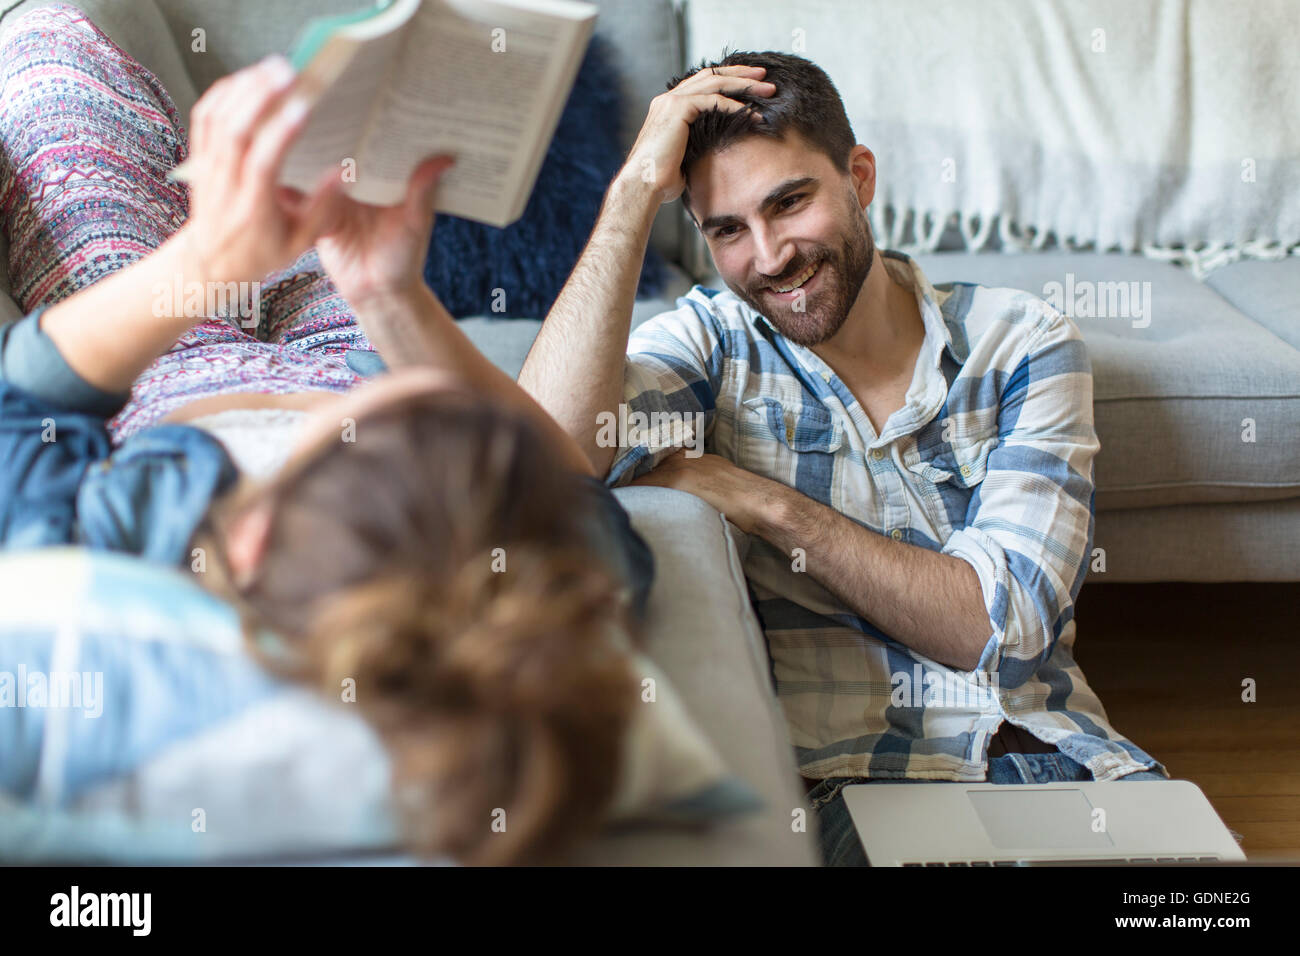 Young couple relaxing at home, young woman lying on sofa, young man sitting on floor, rire Banque D'Images